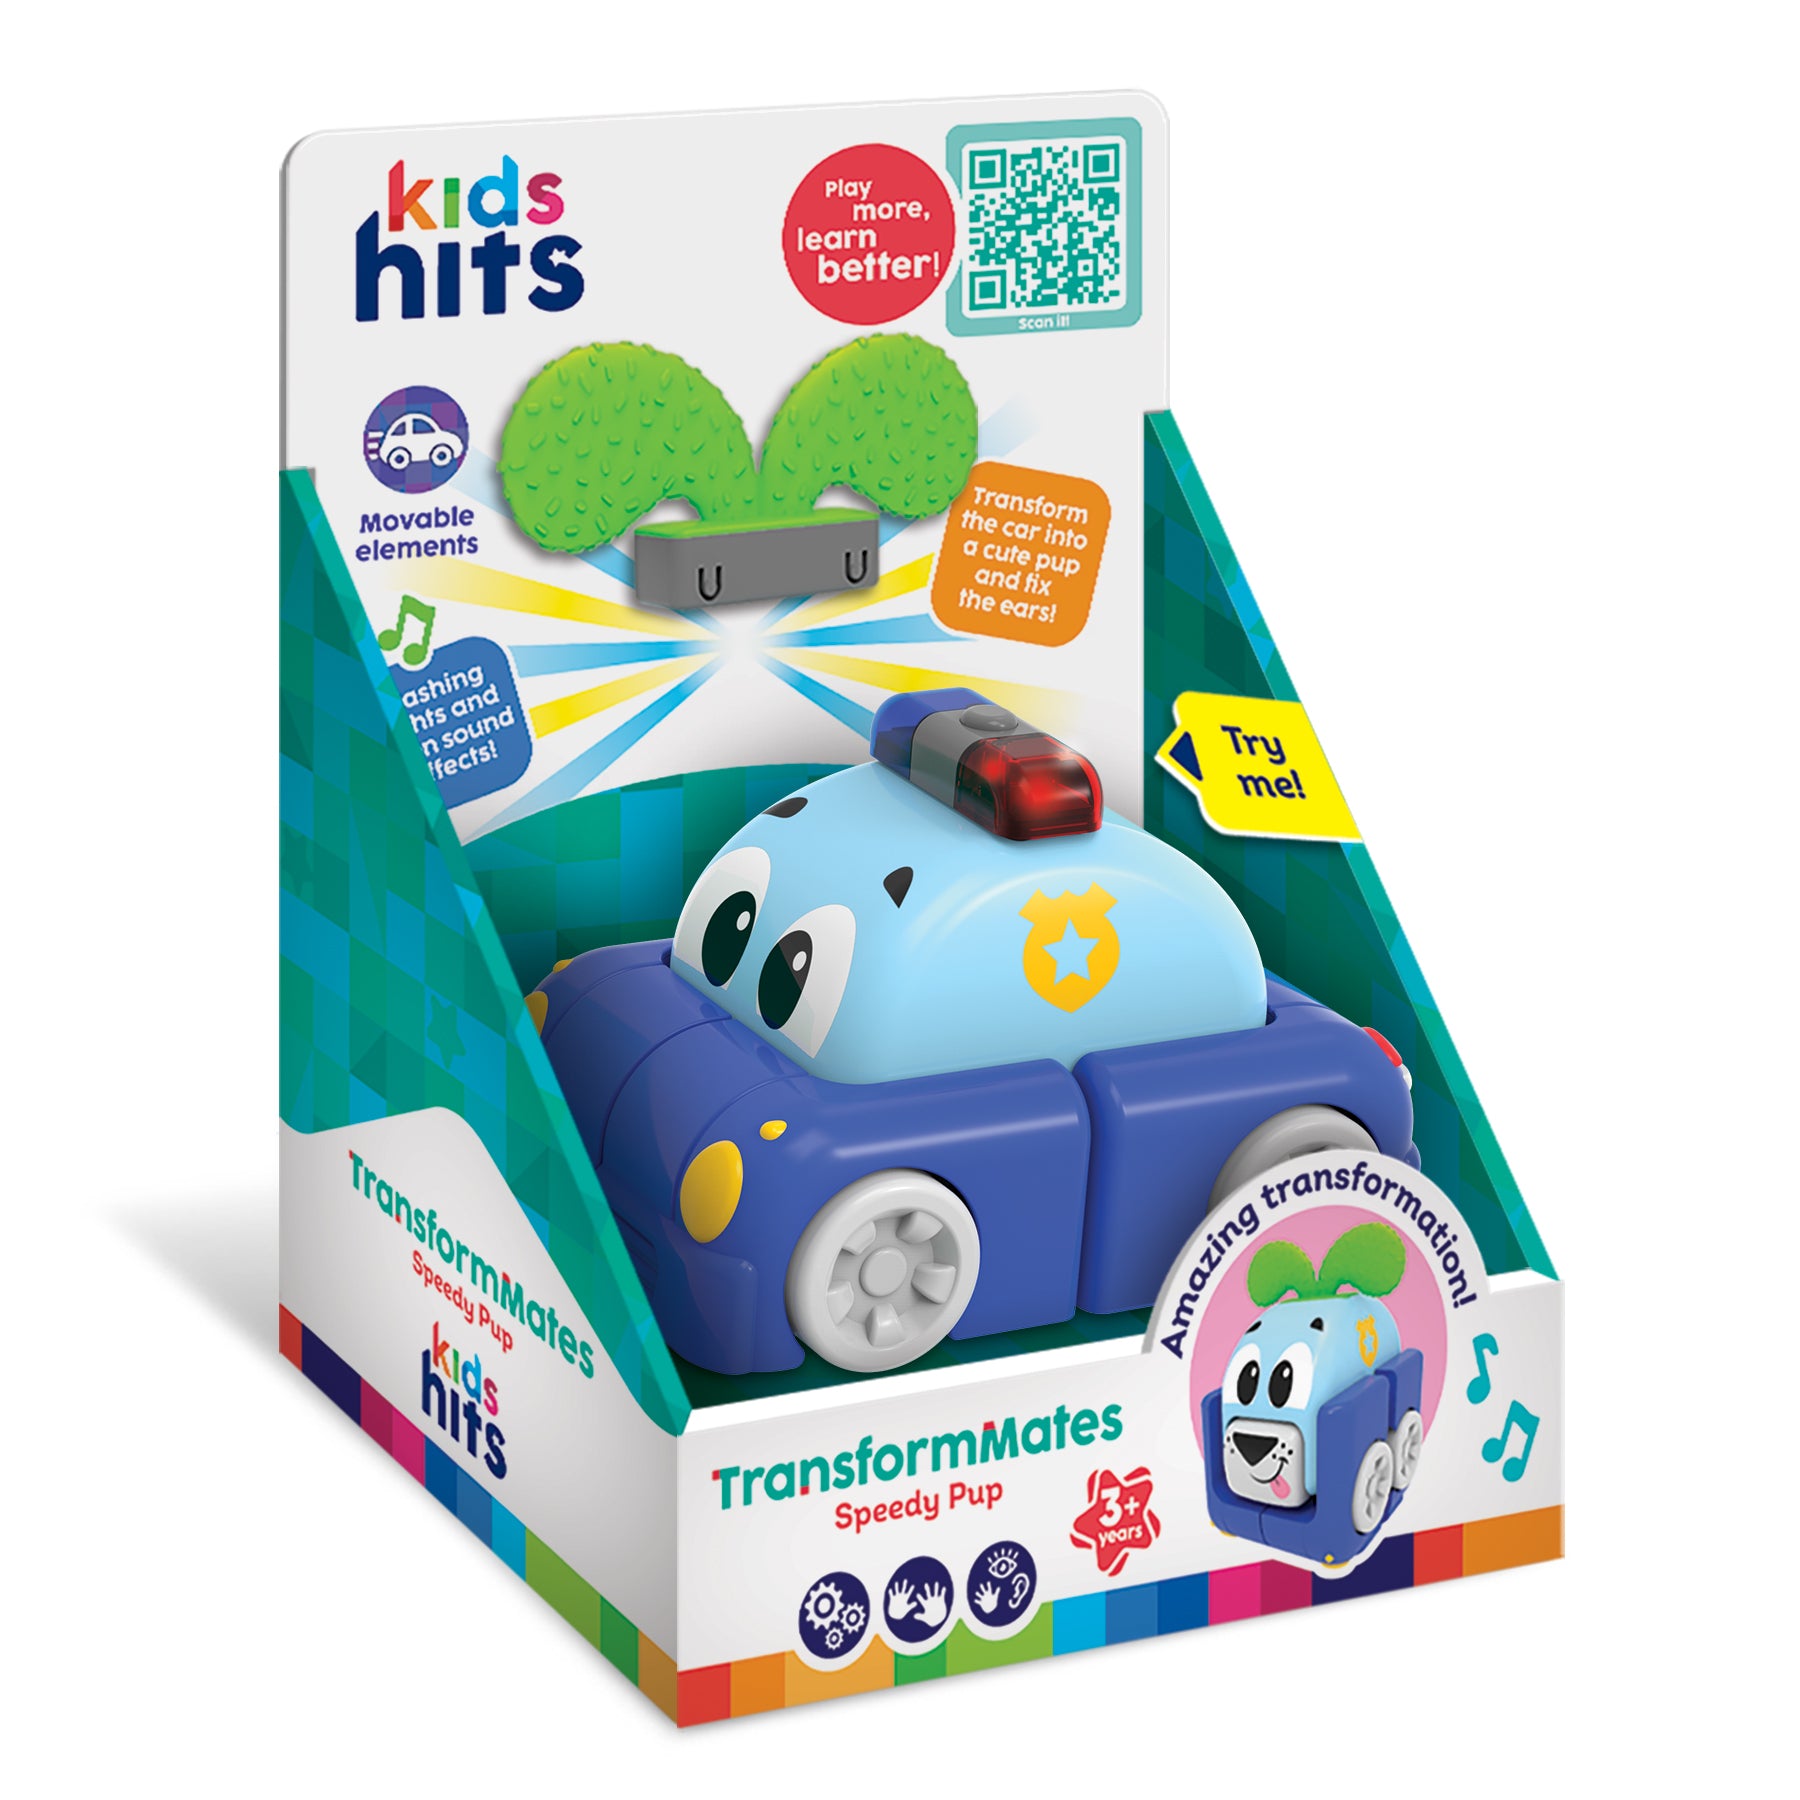 Kids Hits Speedy Pup TransformMates: A Vibrant and Imaginative Delight for Your Little One!